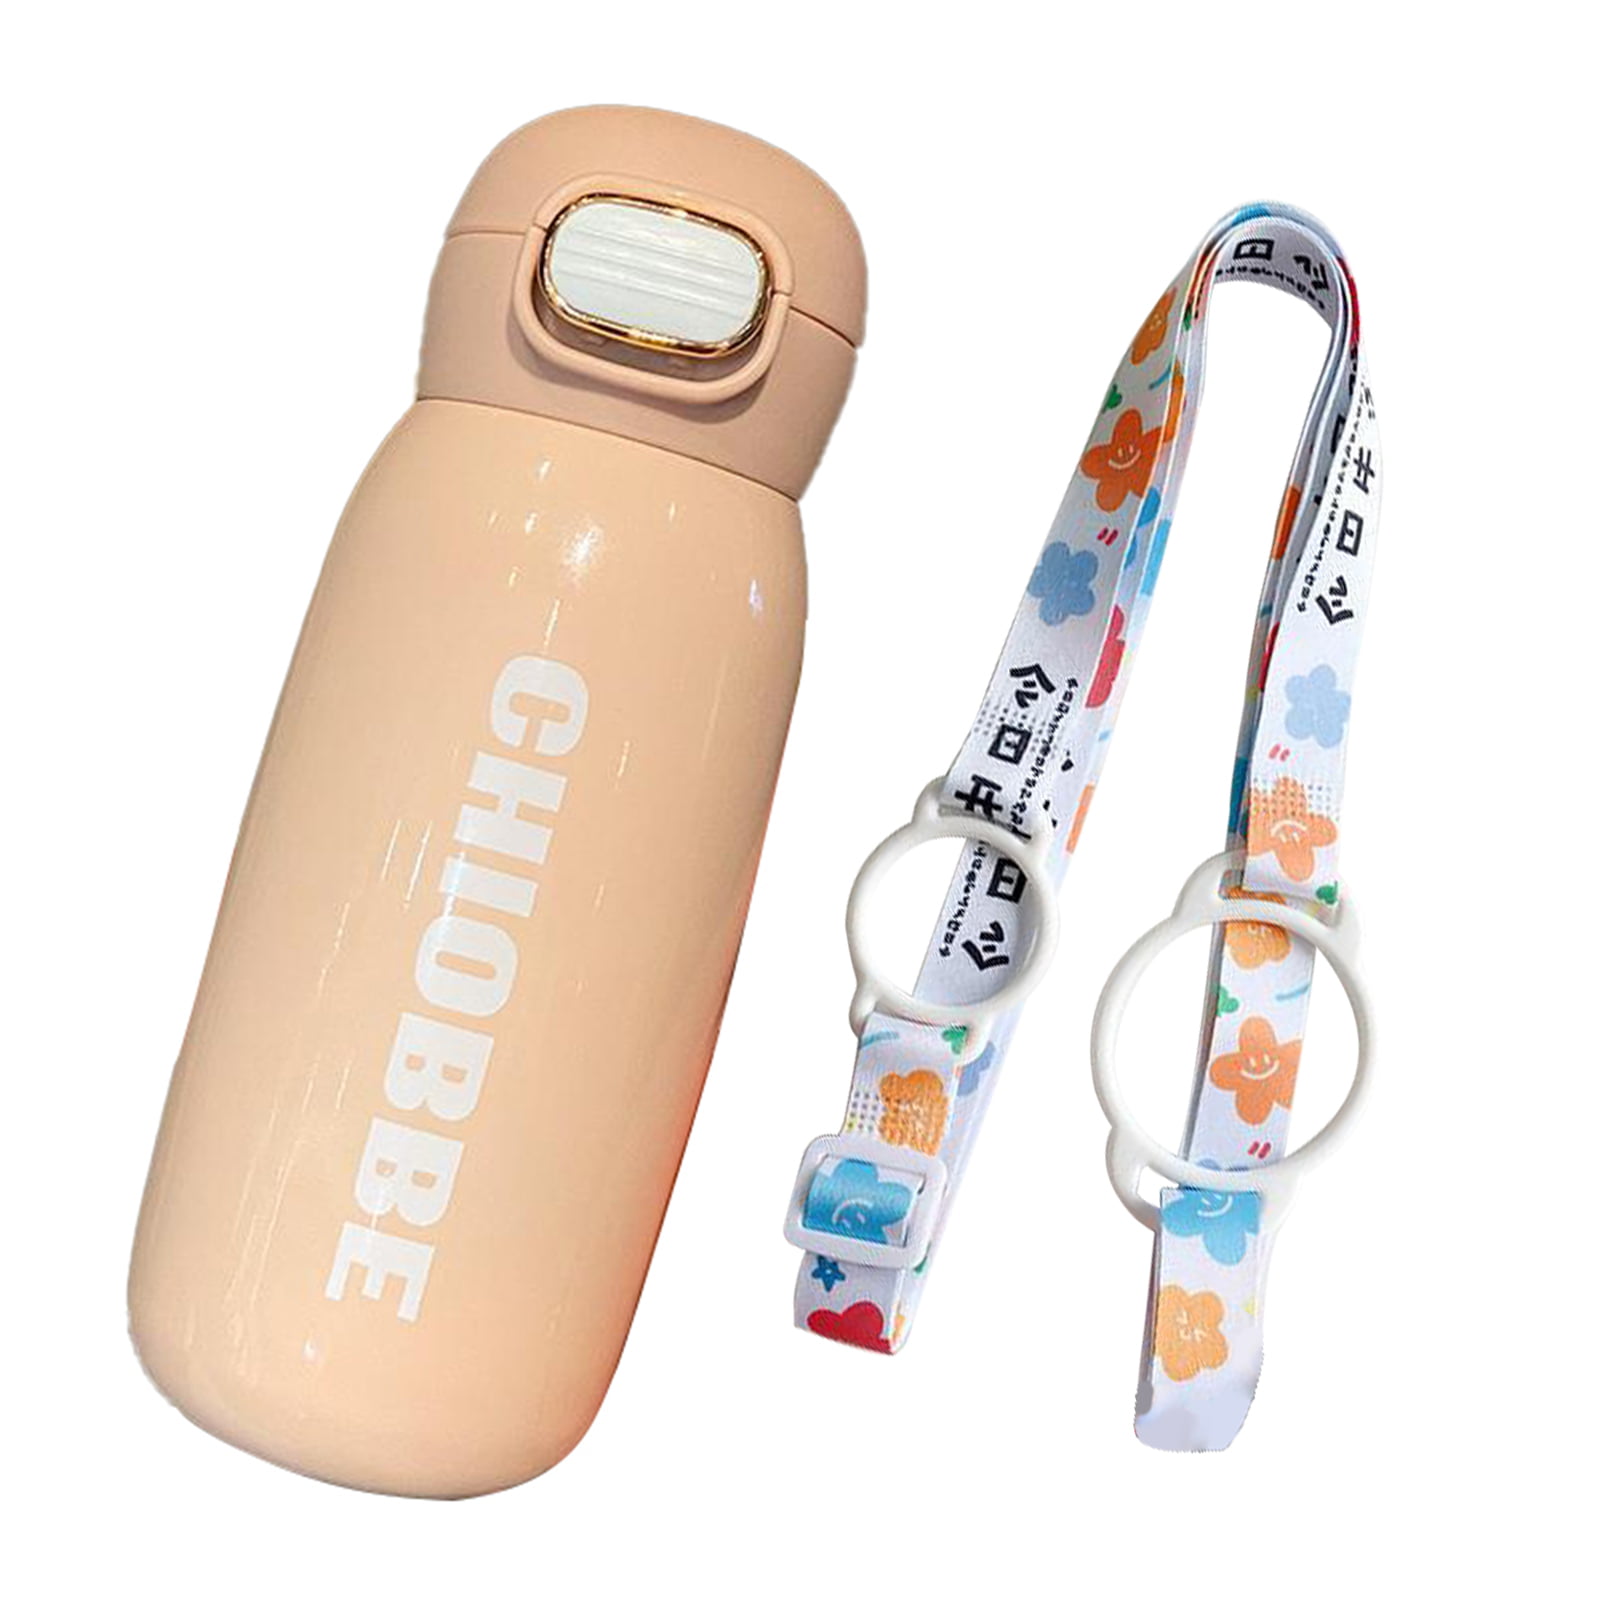 Hesroicy 250ml Straw Bottle with Lanyard Cute Design Portable Whale Sprays  Water Kids Bottle for Outdoor 